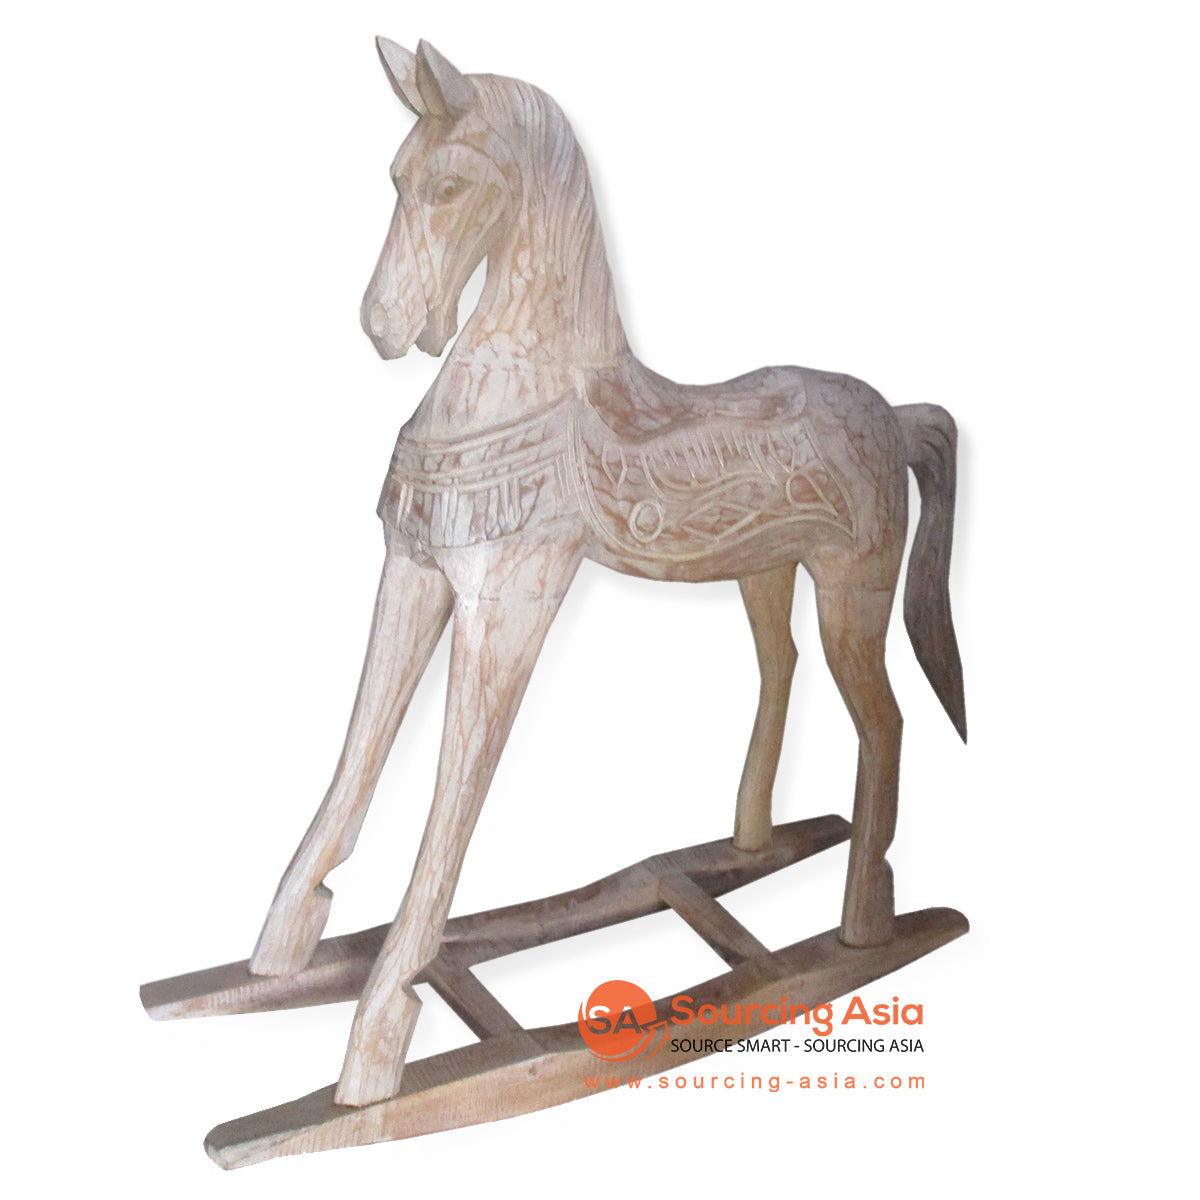 THE071-LBW LARGE BROWN WASH WOODEN HORSE DECORATION